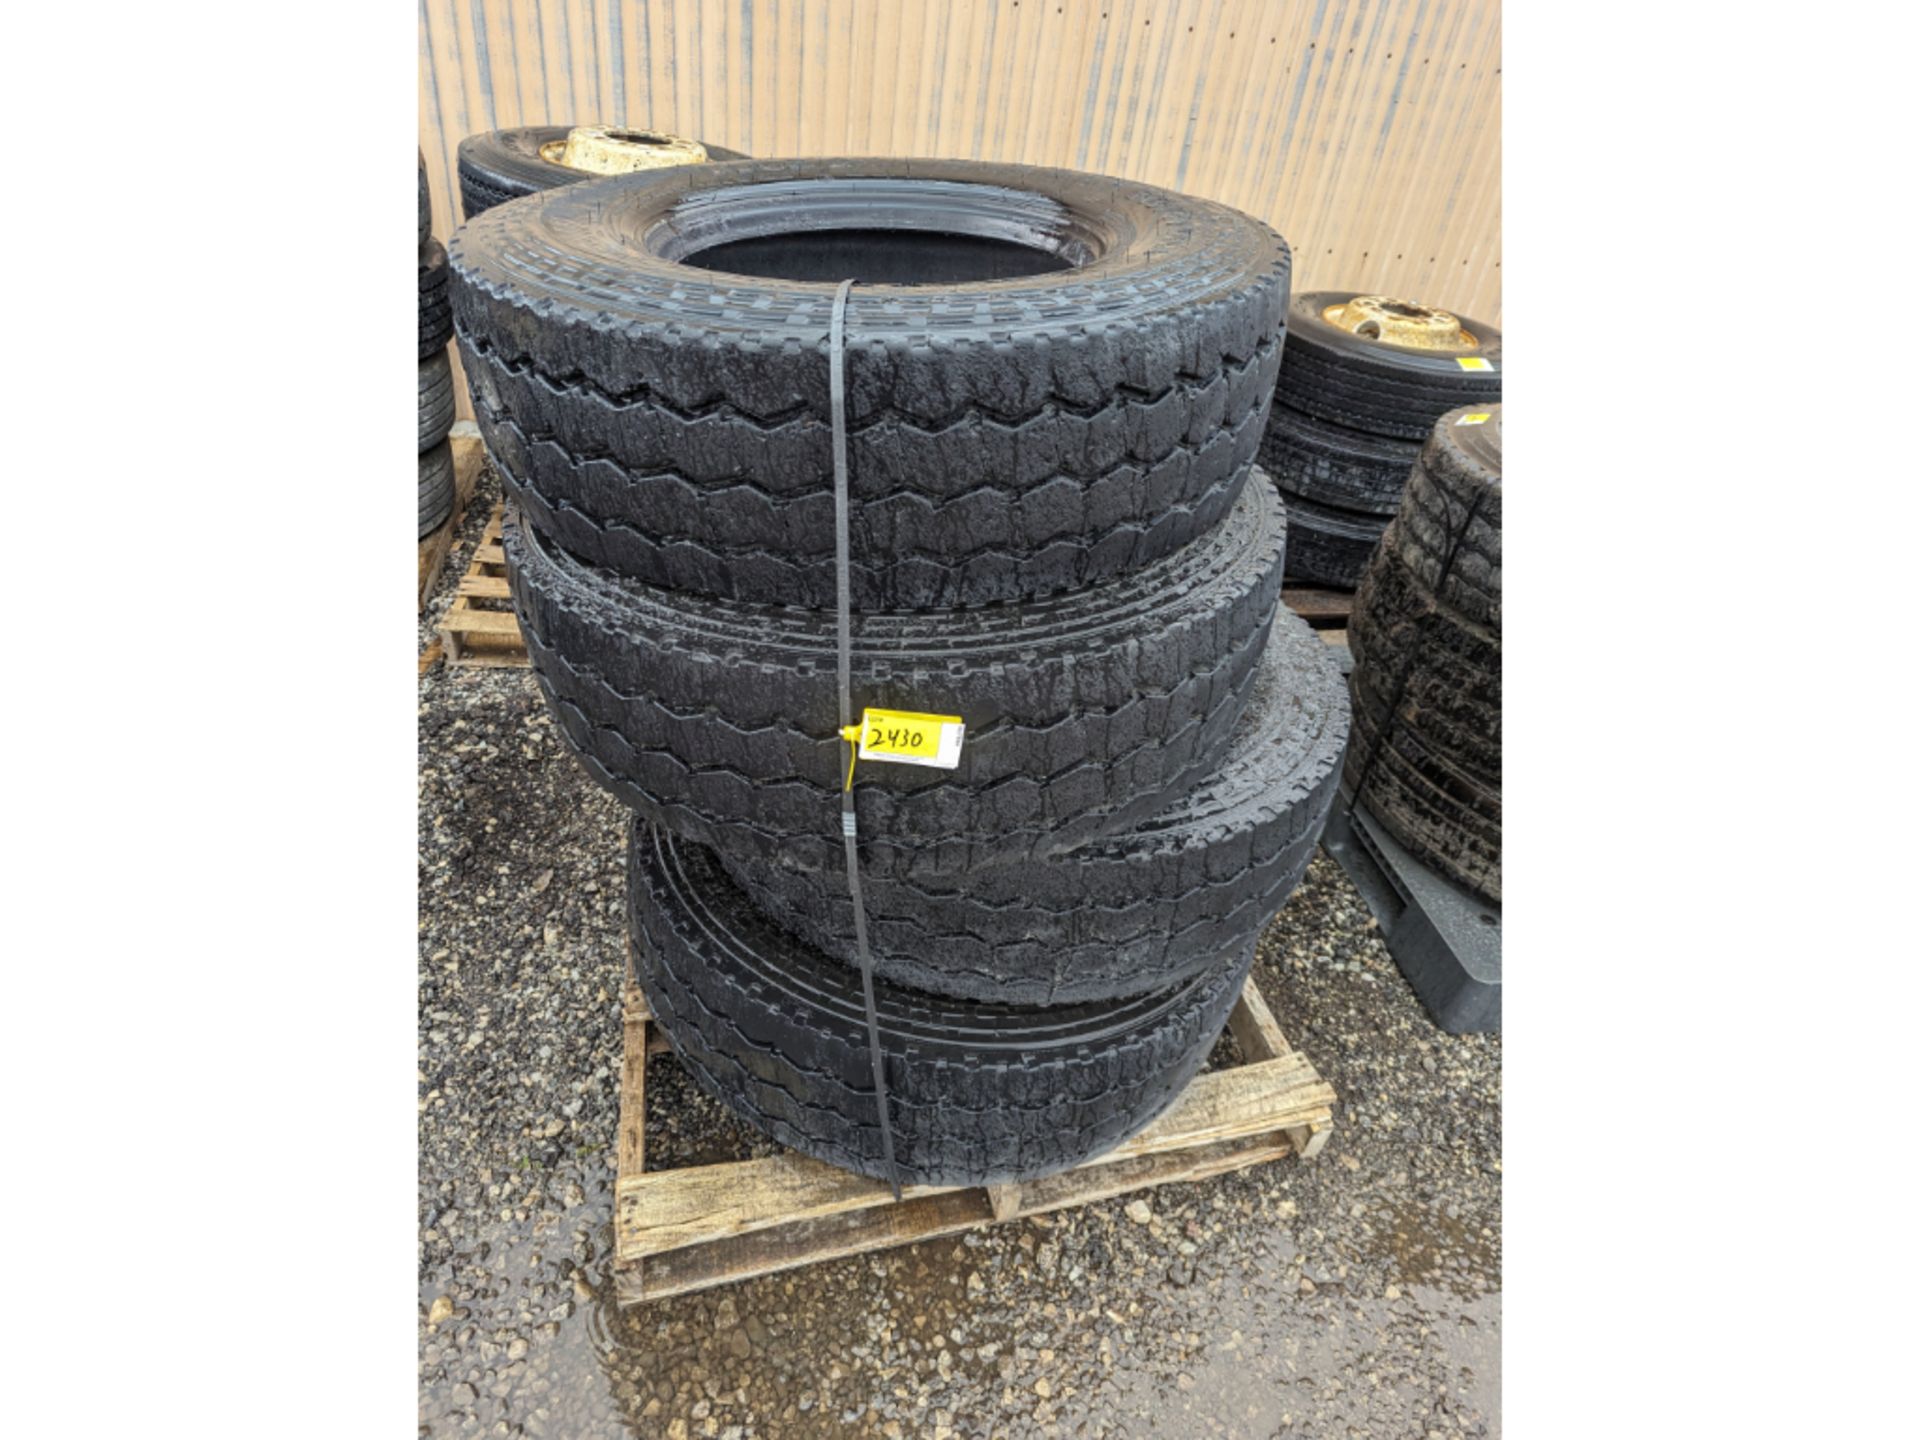 4 Michelin XZUS 2 315/80R22.5 commercial truck tires USED Virgin Tread Surplus Take Off